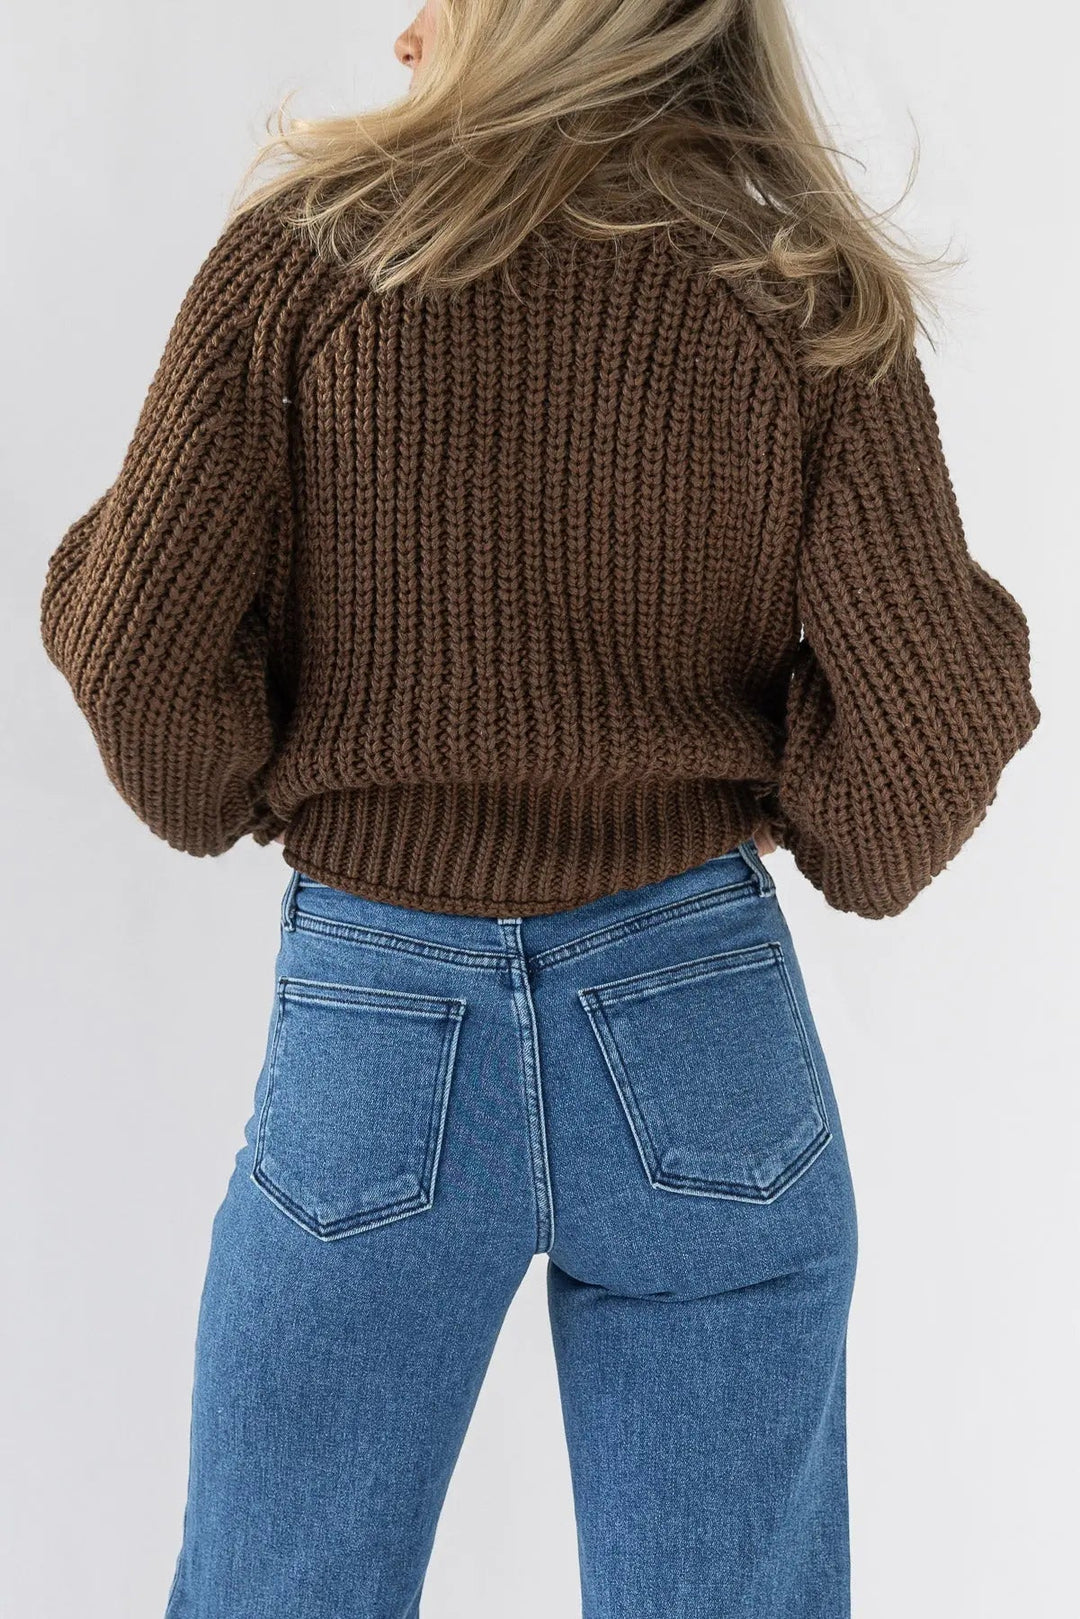 Cozy Conditions Brown Sweater - Final Sale